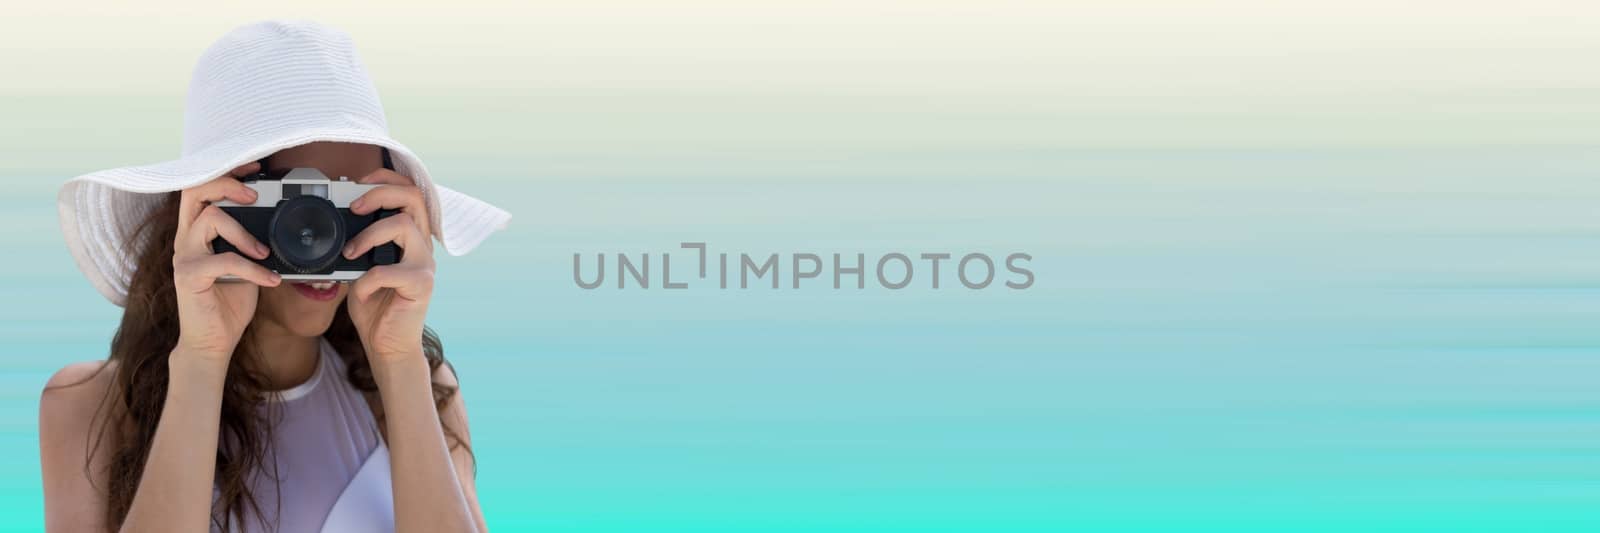 Digital composite of Millennial woman in summer hat with camera against light blue background